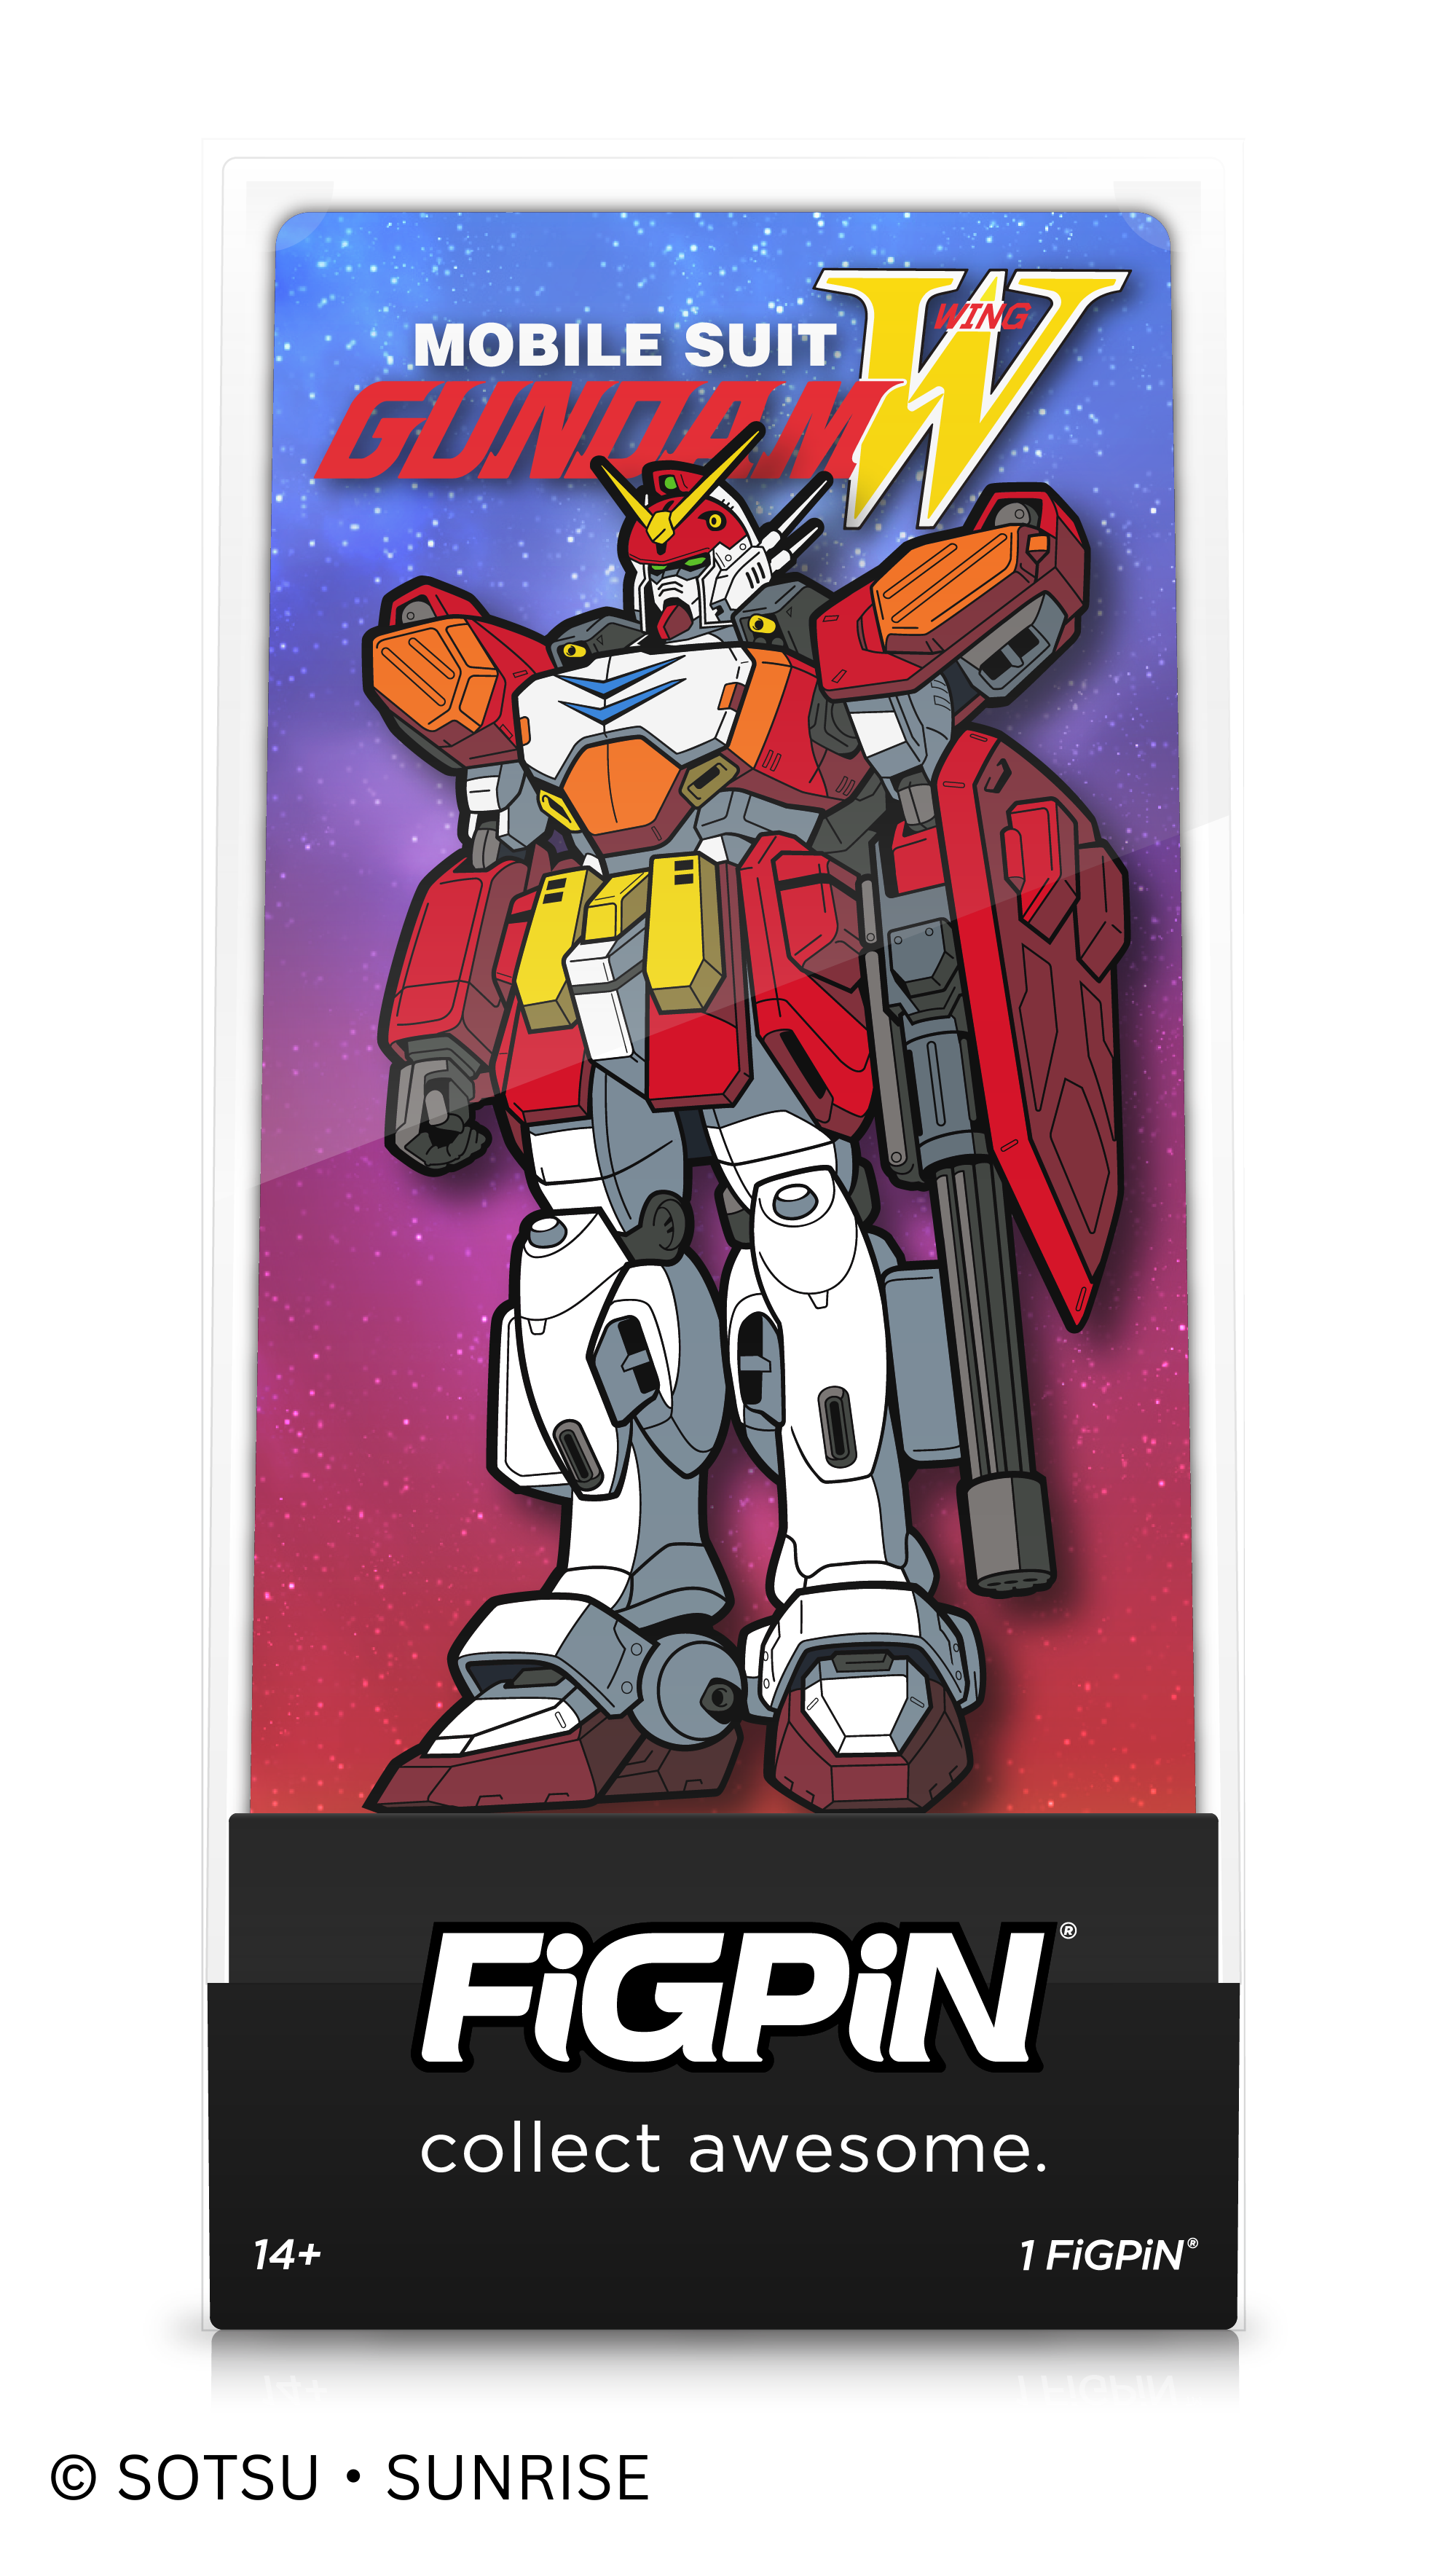 Front view of  Mobile Suit Gundam Wing's Heavyarms enamel pin inside FiGPiN Display case reading “collect awesome"